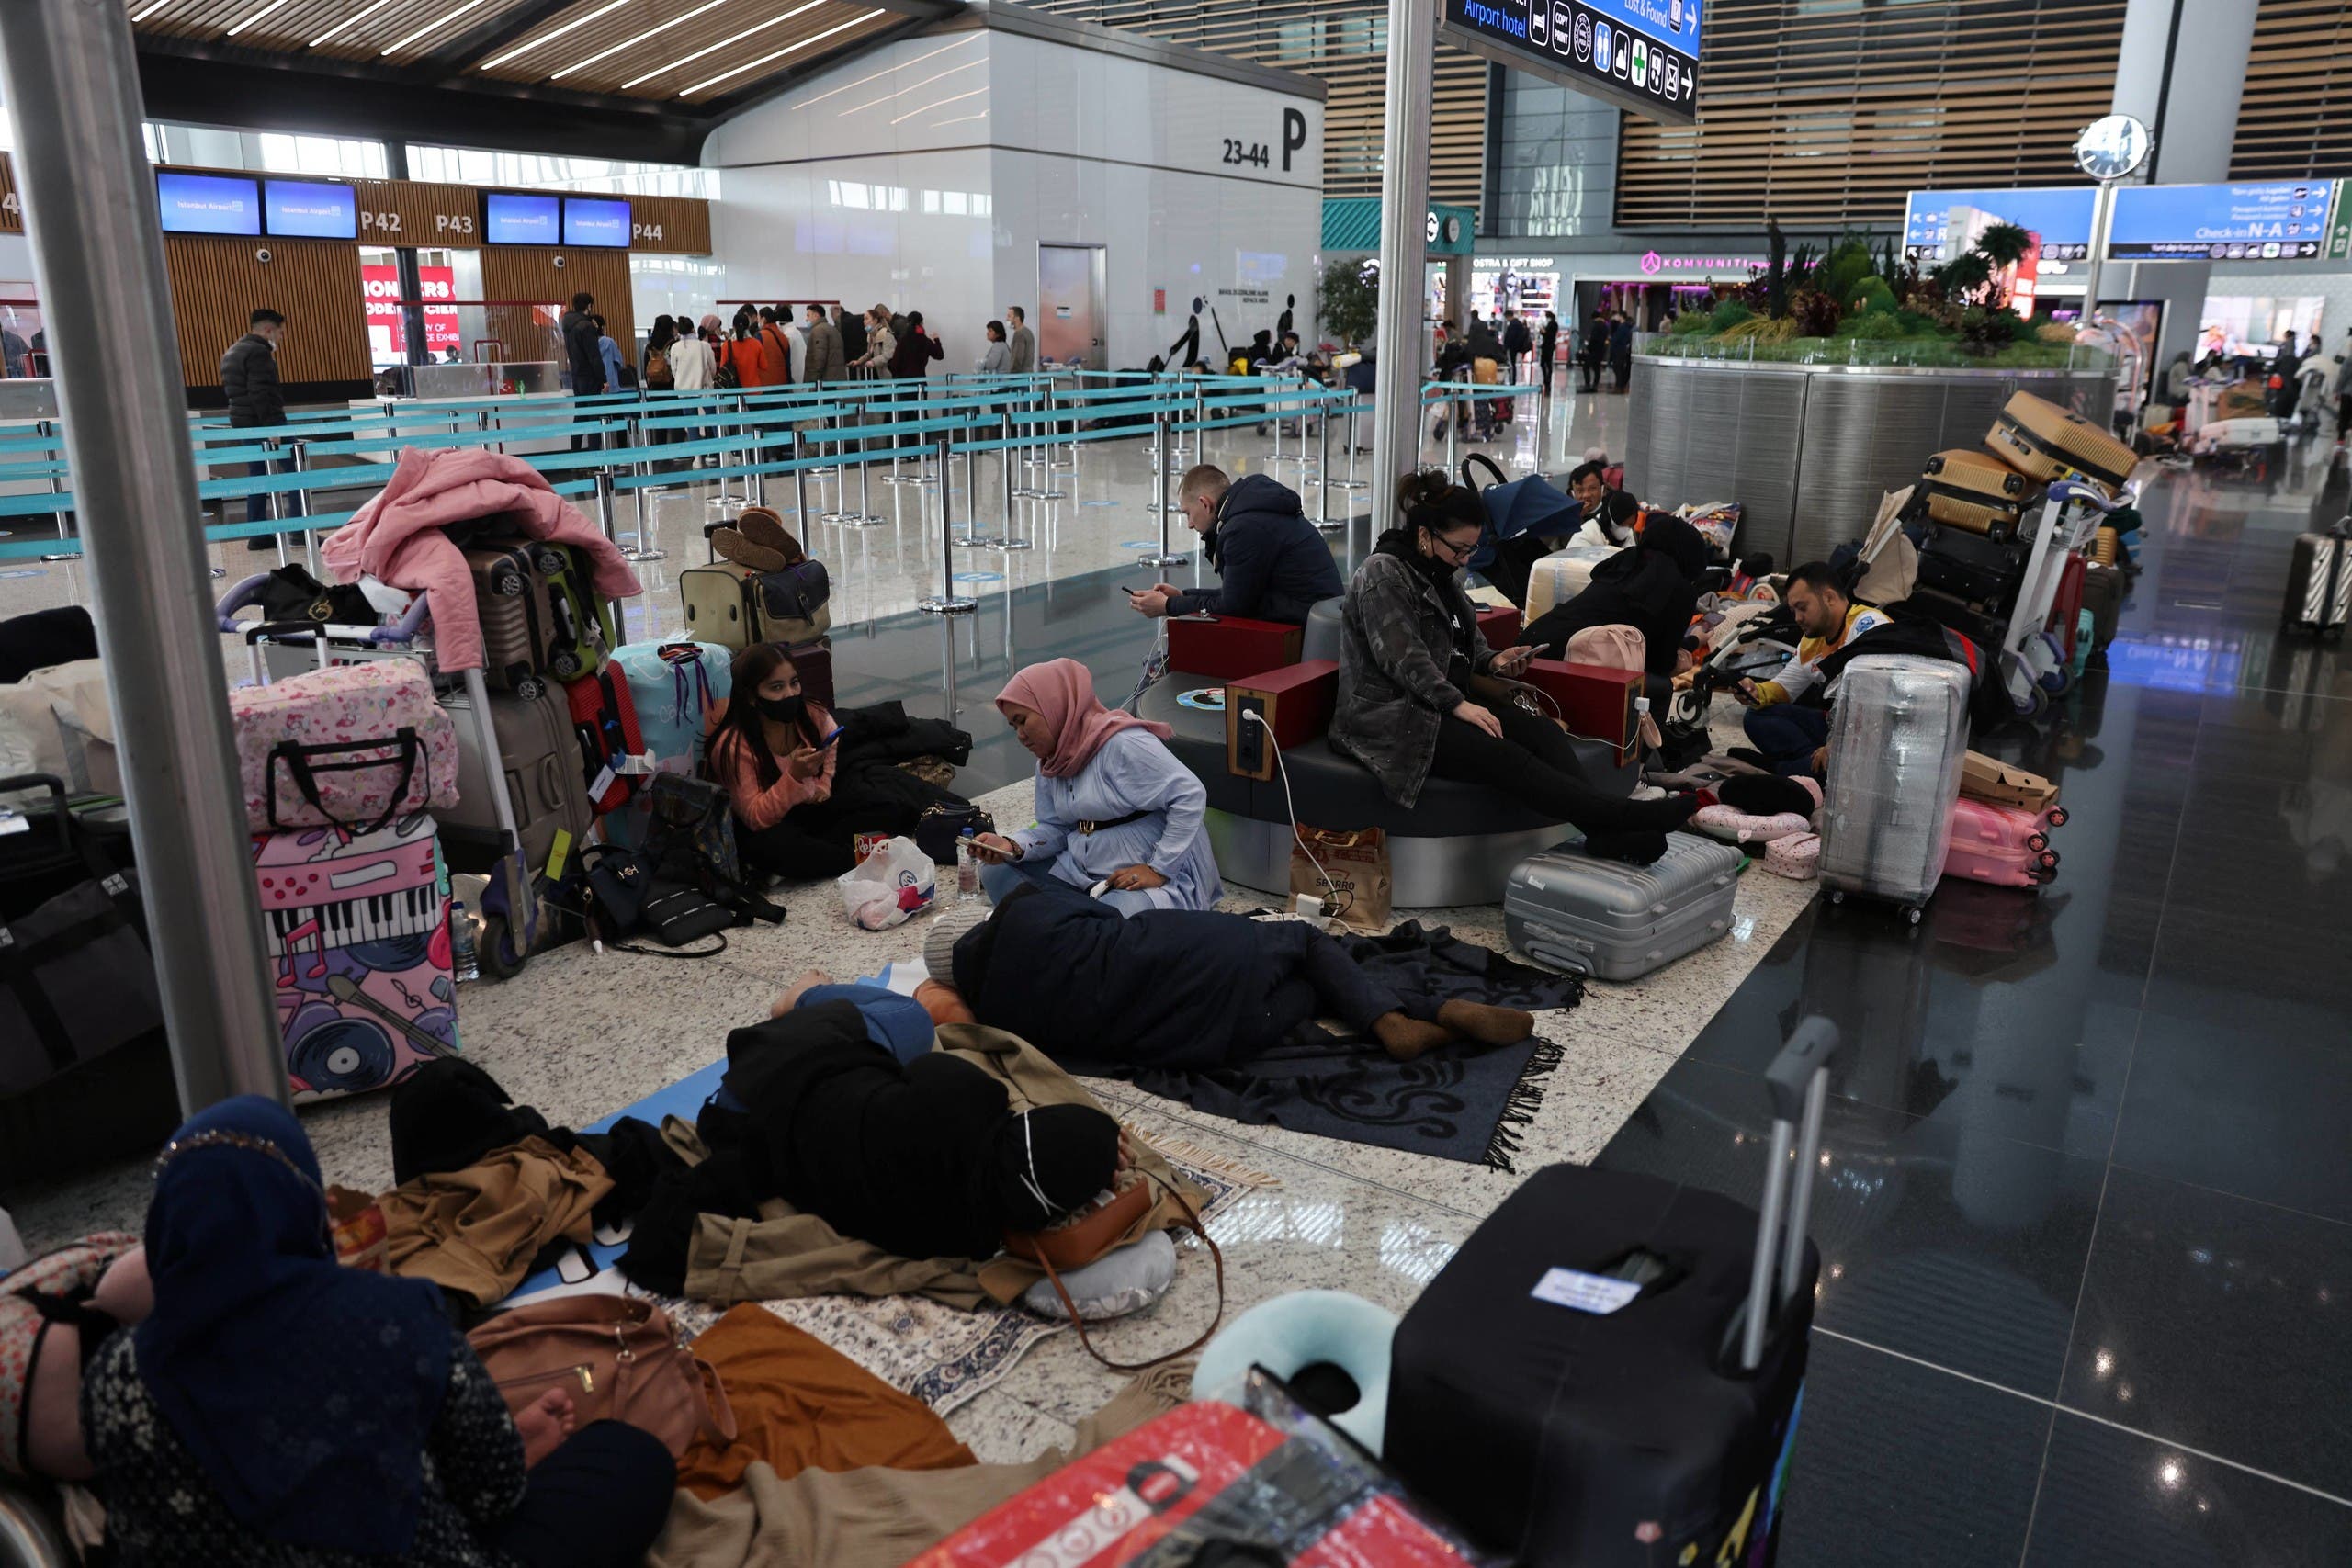 Stranded passengers wait for their flights at Istanbul airport, which is suspending flights due to heavy snowfall, in Istanbul, Turkey January 25, 2022. (Reuters)